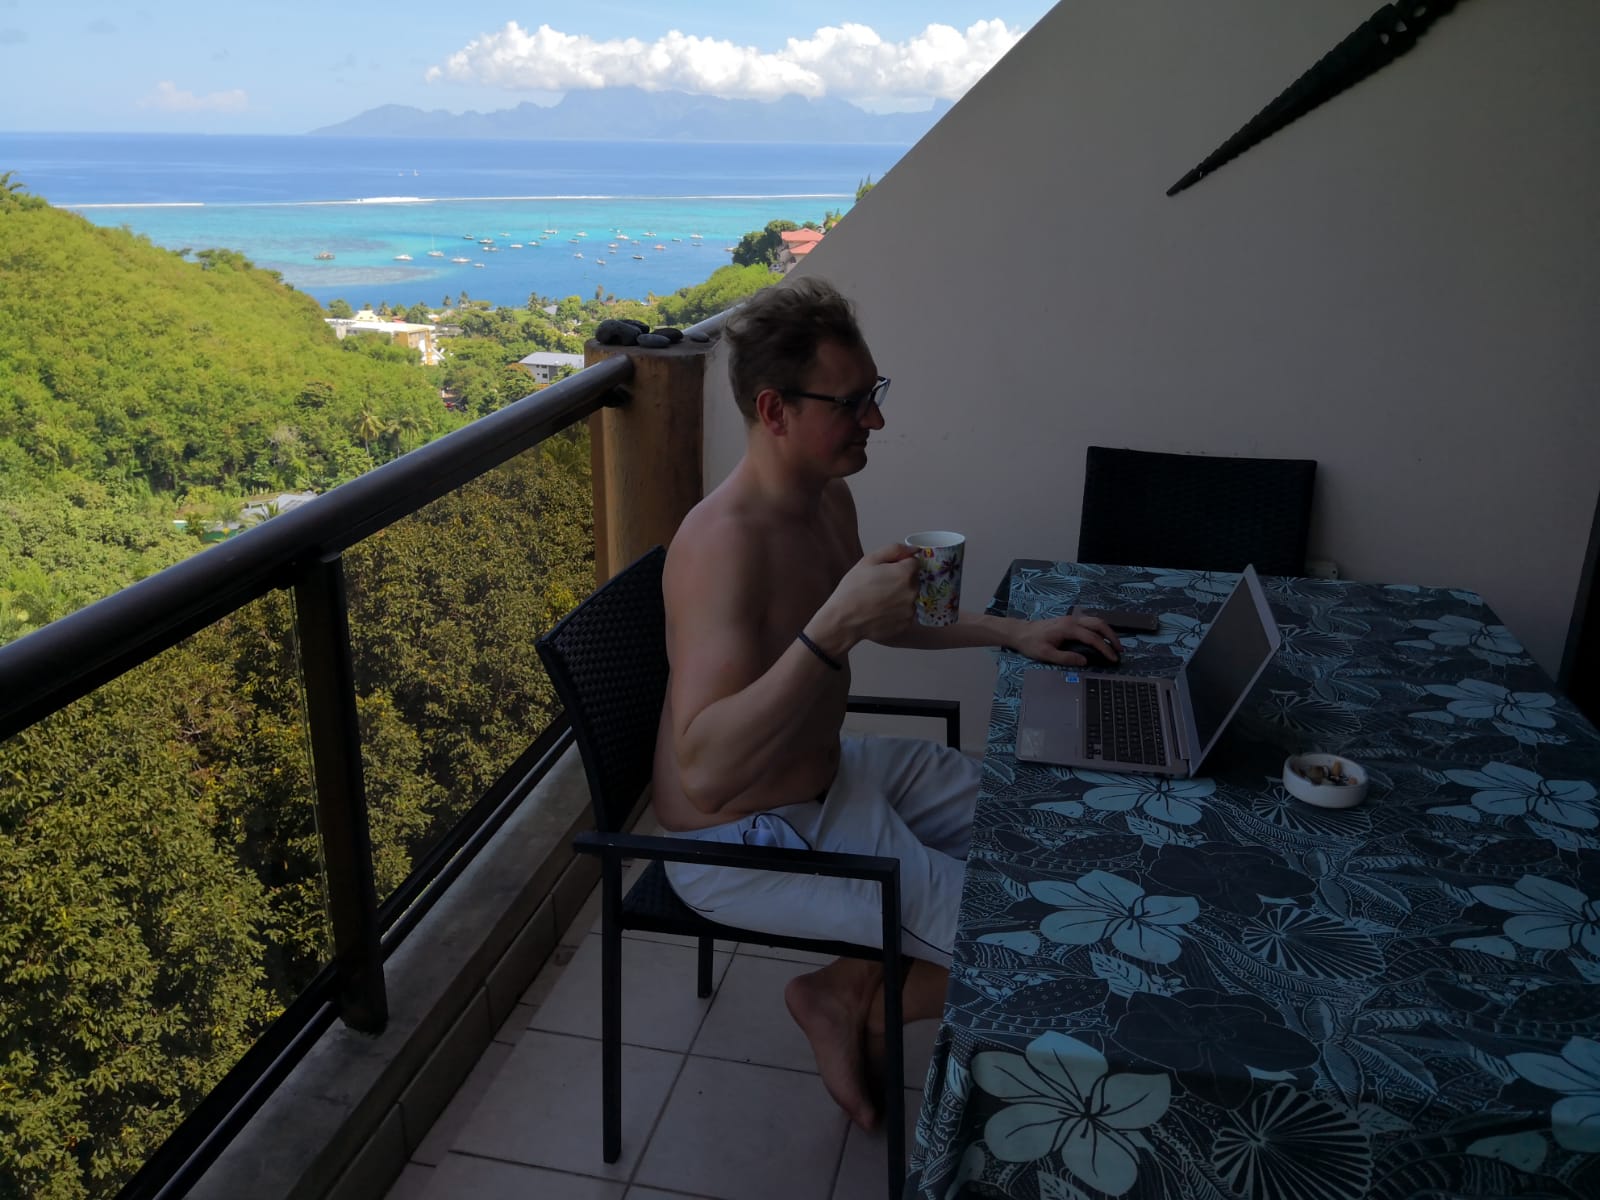 Swim and beach breaks: the best place I've worked from as a digital nomad is... Tahiti! : Swim and beach breaks: the best place I've worked from as a digital nomad is... Tahiti!